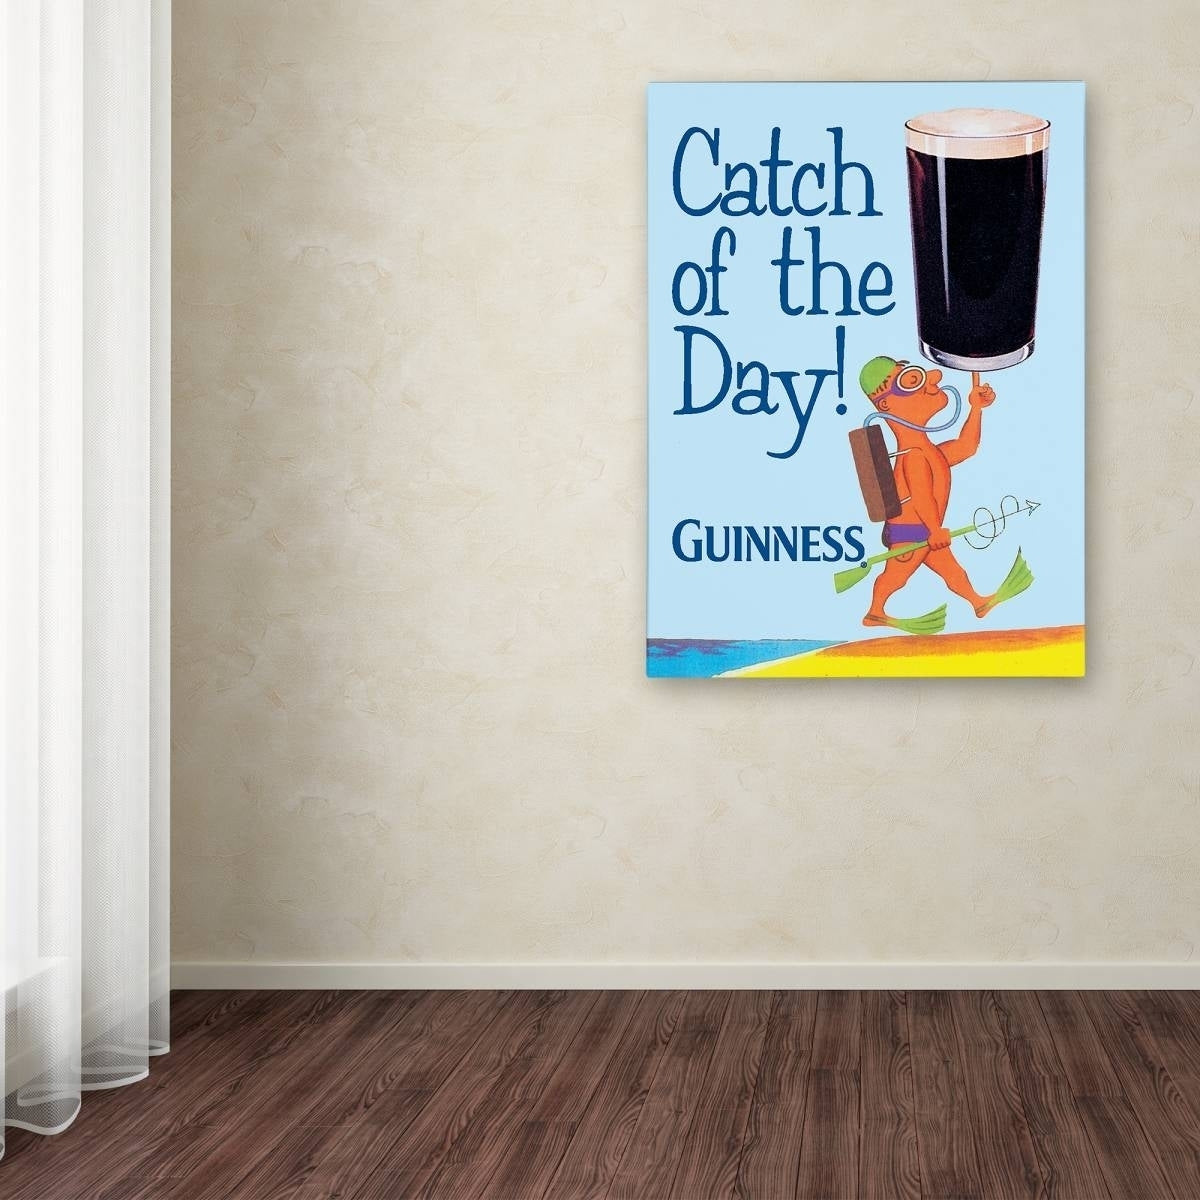 Beachside Guinness Brewery 'Catch Of The Day' canvas print.